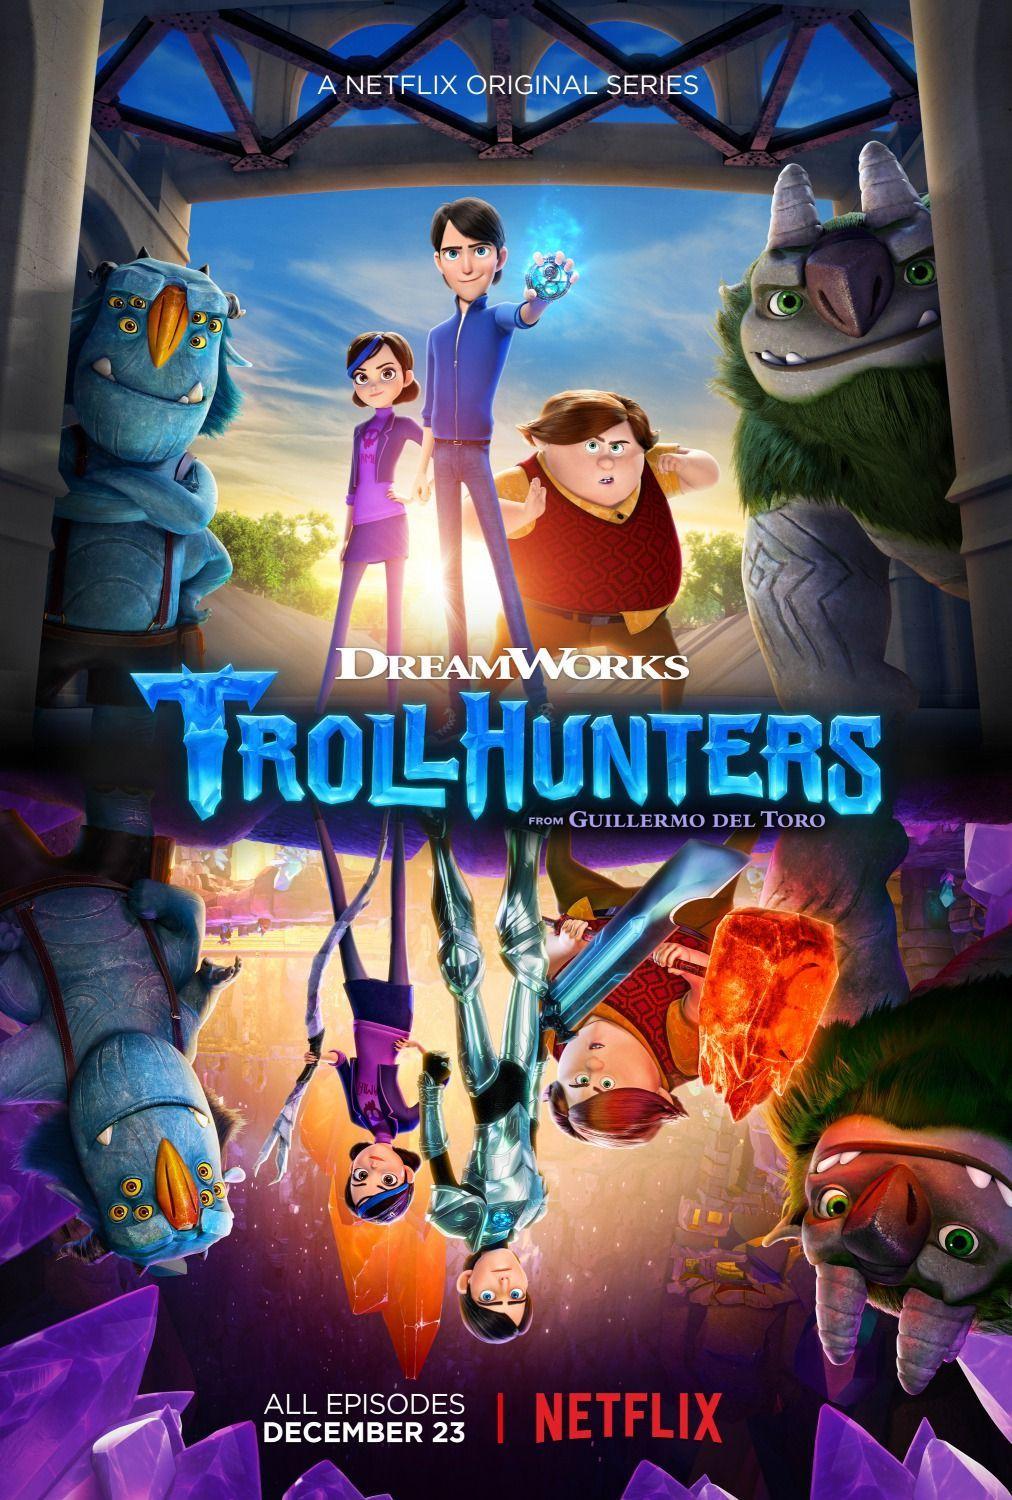 Trollhunters Netflix Animated Series Poster 1. Posters